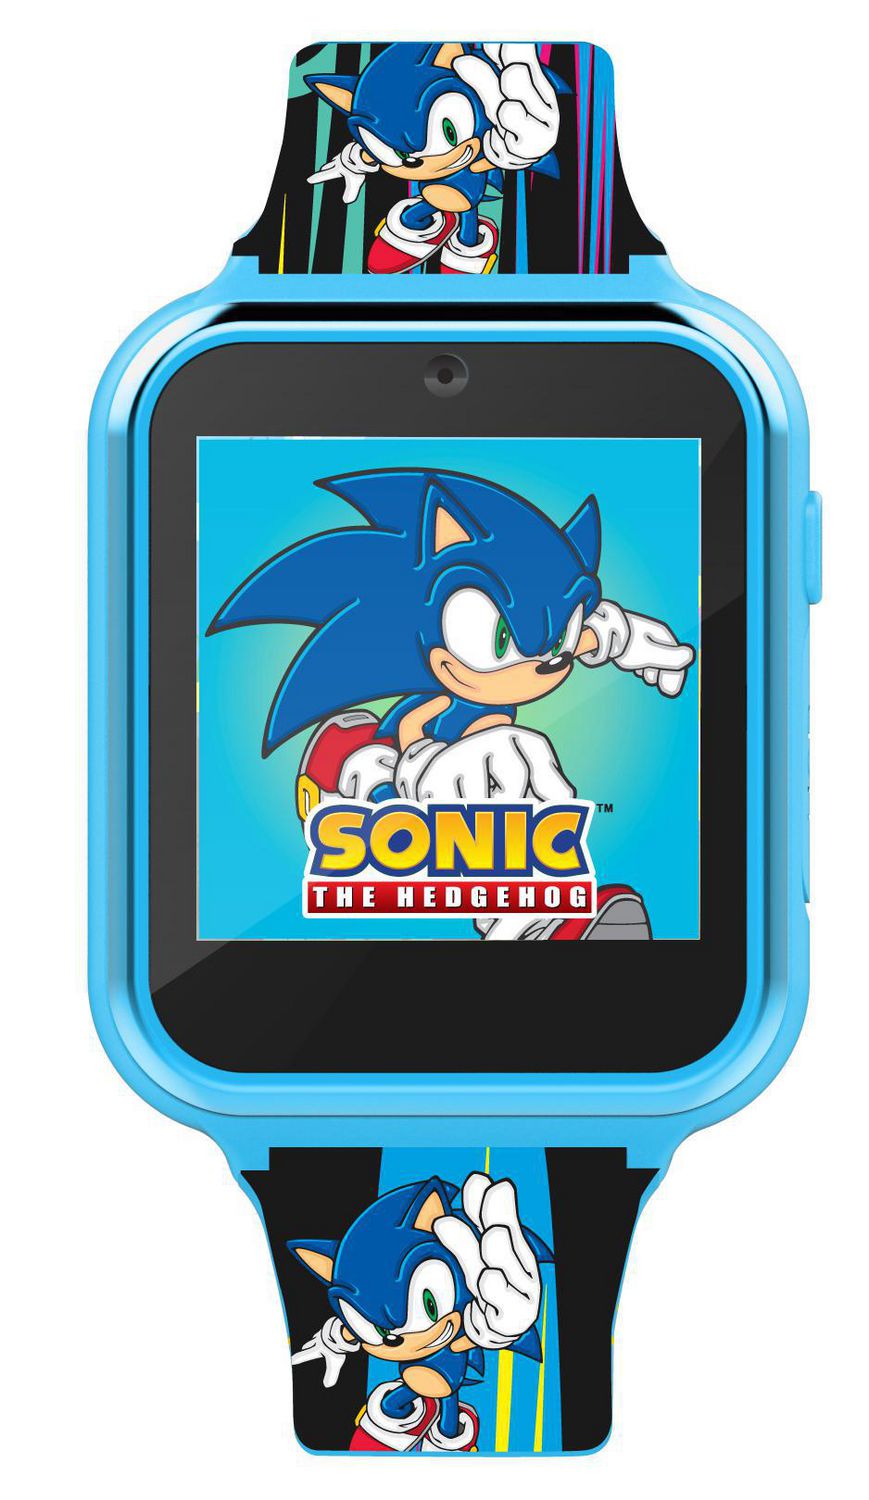  FirstTrends Sonic The Hedgehog Interactive Camera for